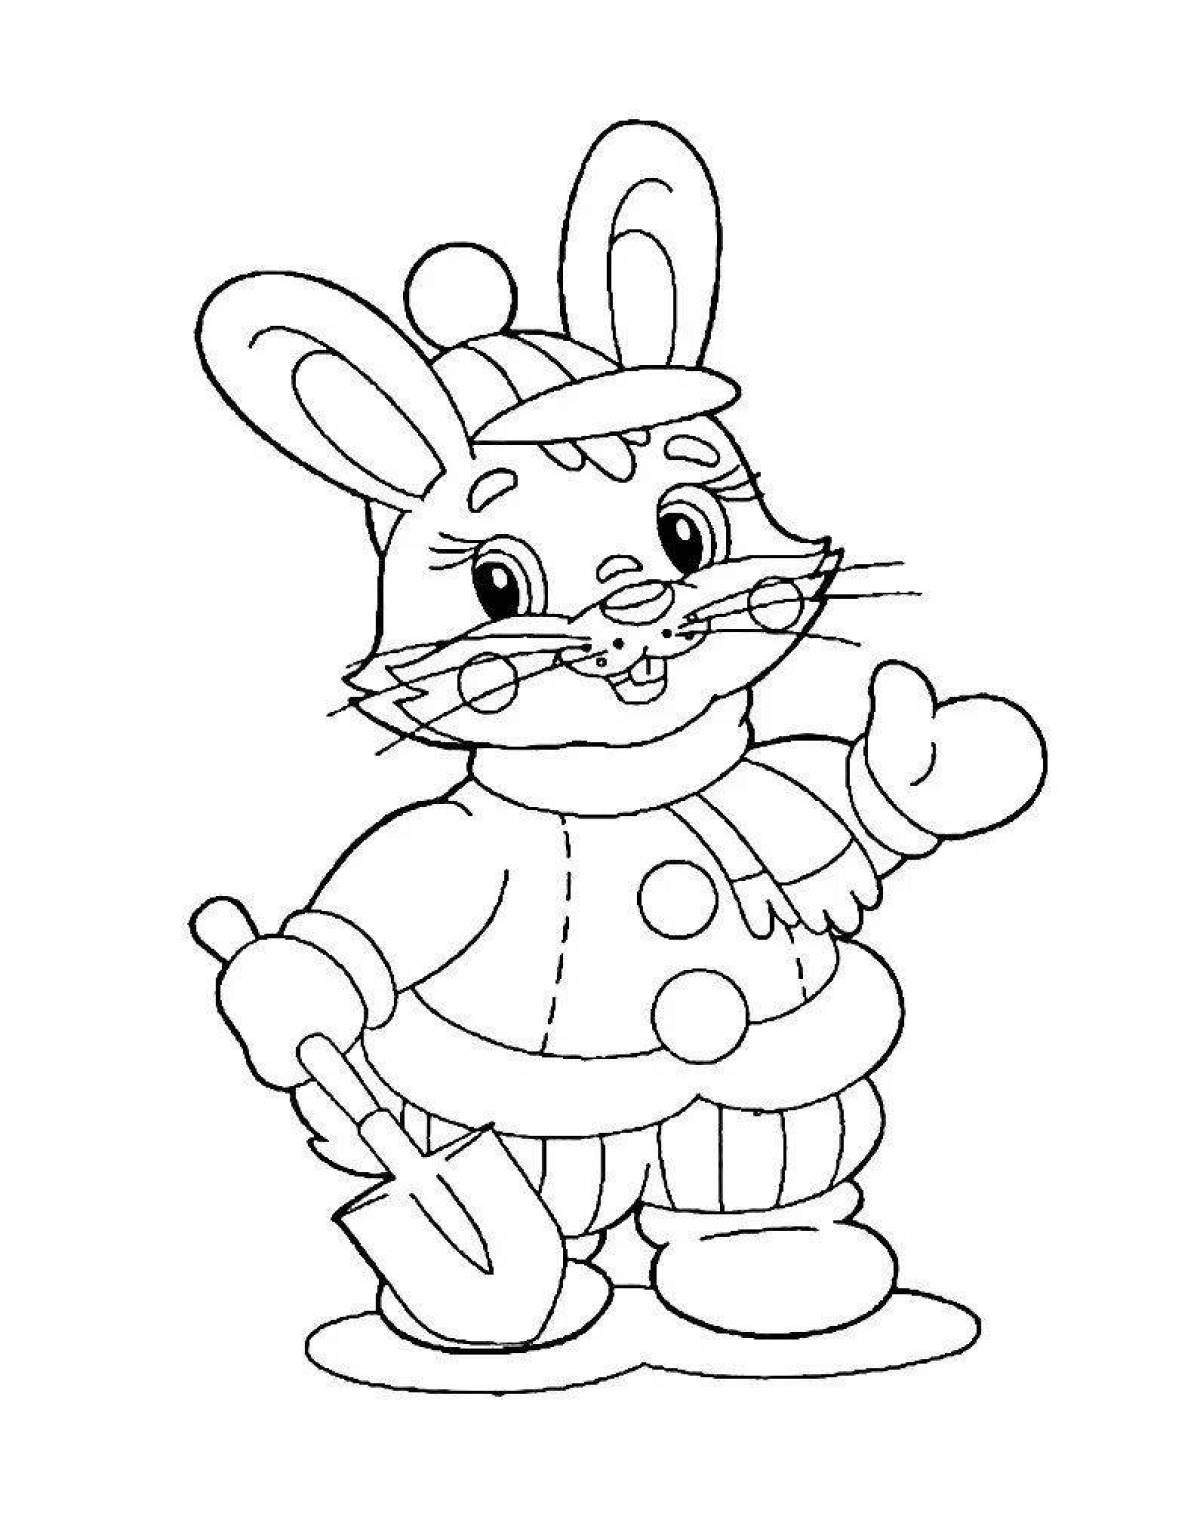 Live coloring rabbit new year